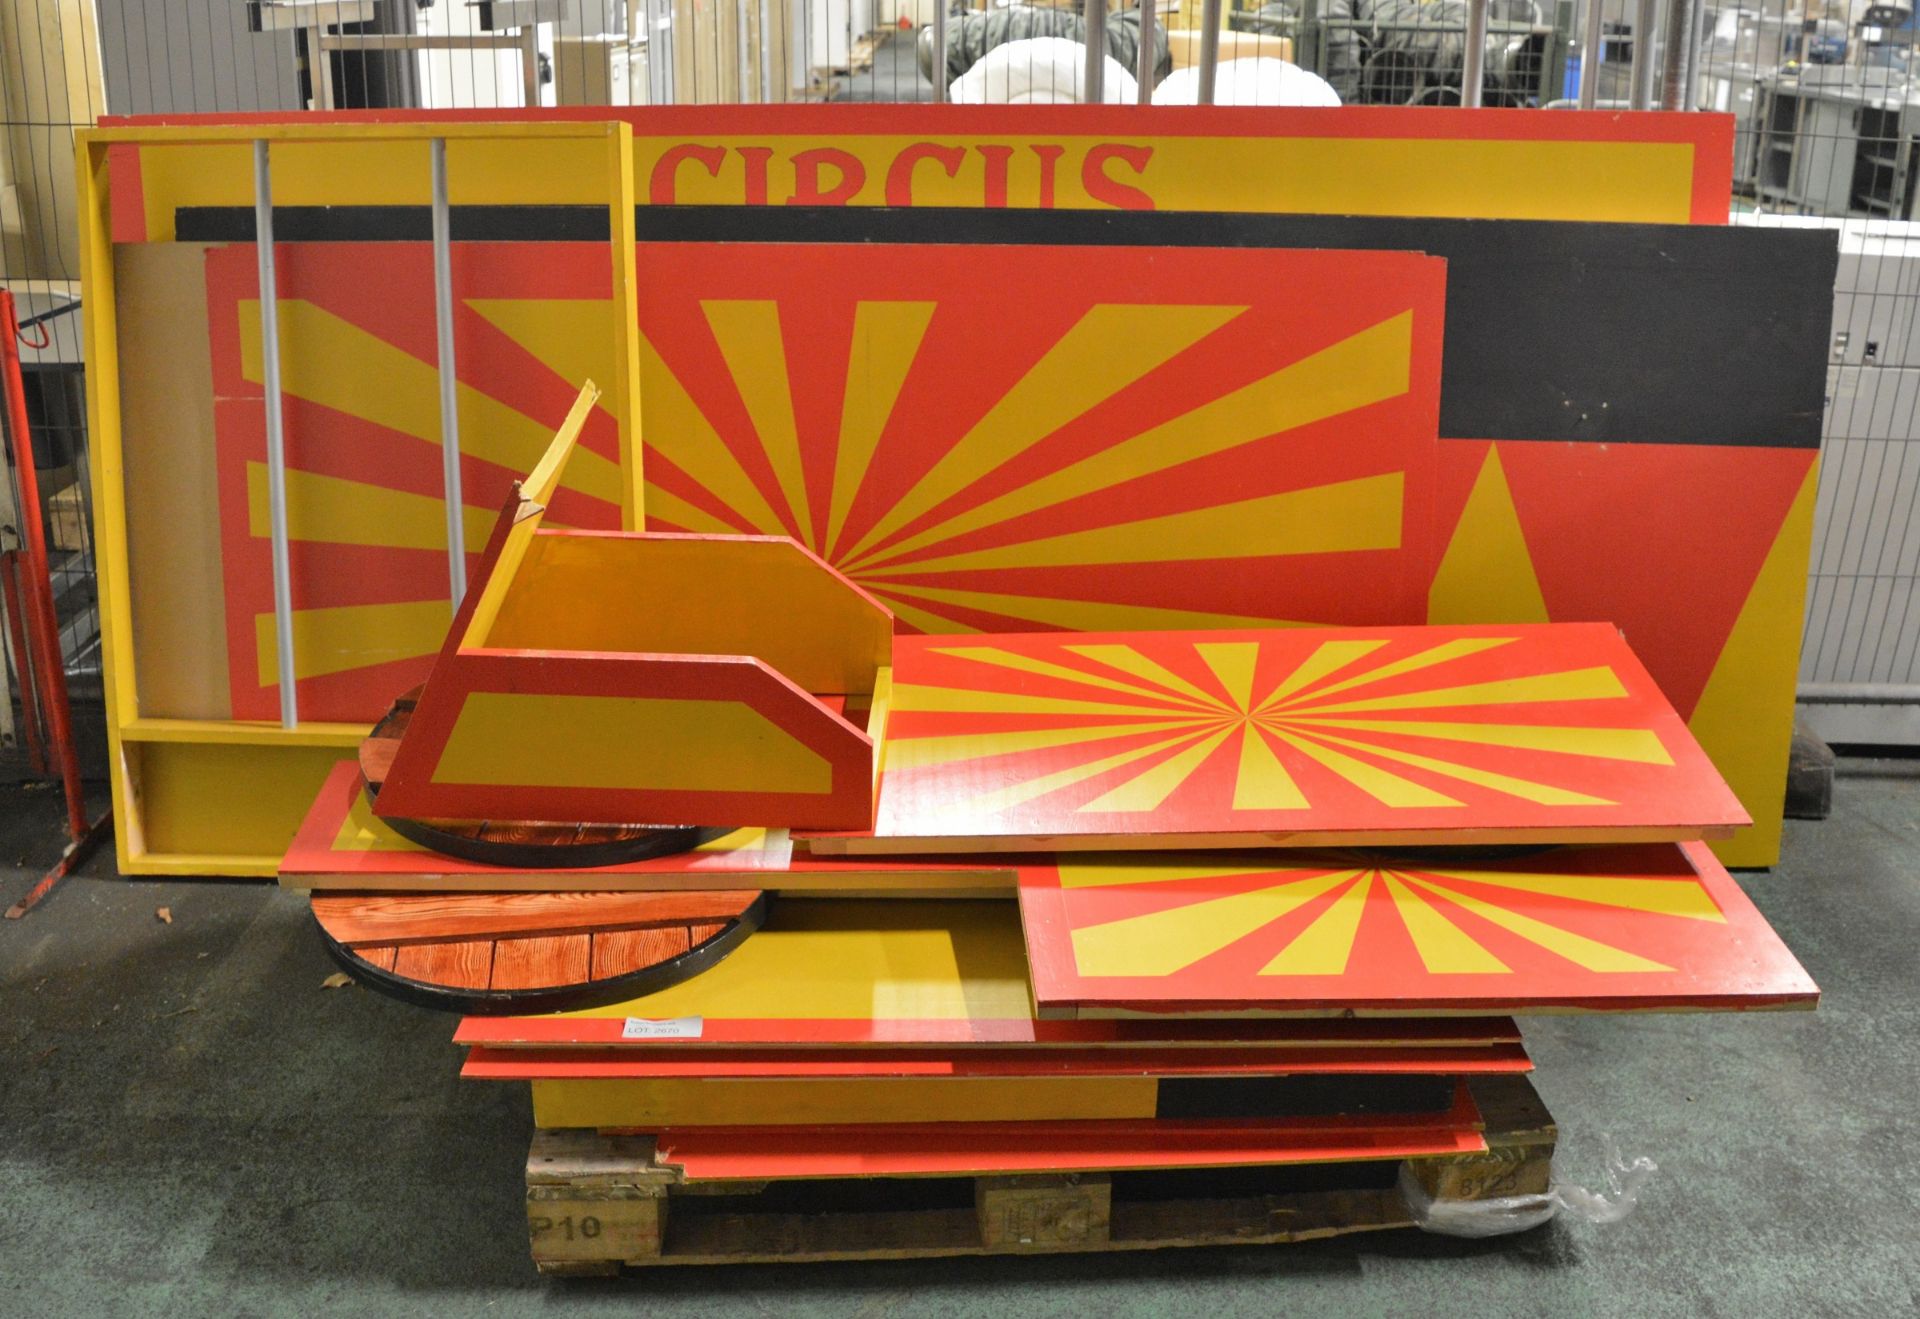 Wooden Circus Train/Wagon Stage Prop Unit - yellow & red design